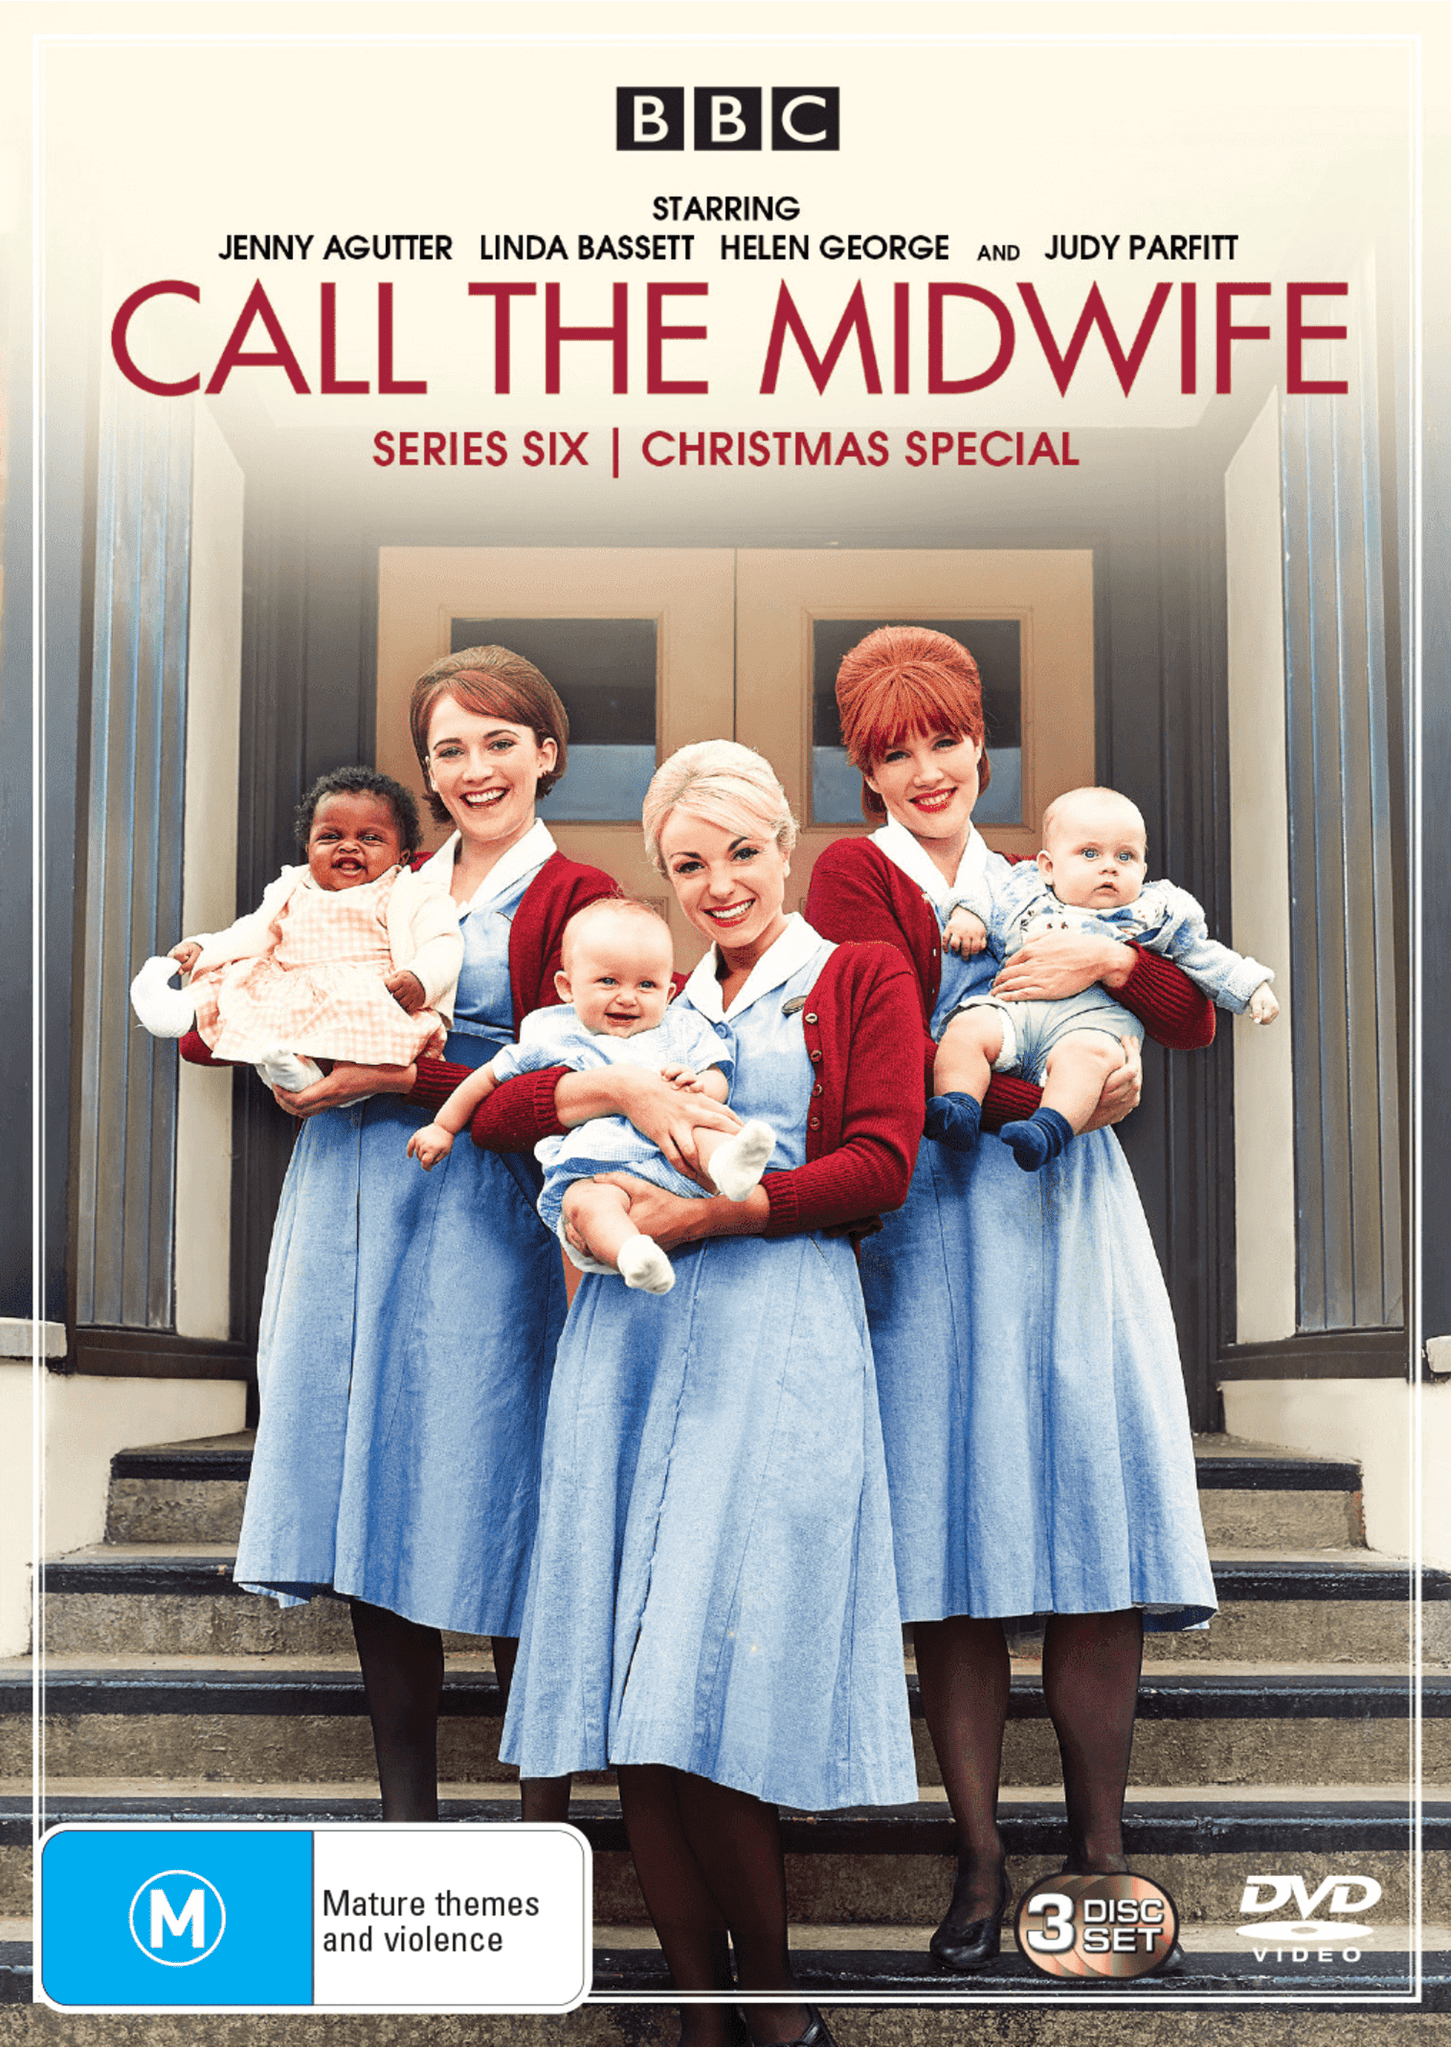 CALL THE MIDWIFE: SERIES 6